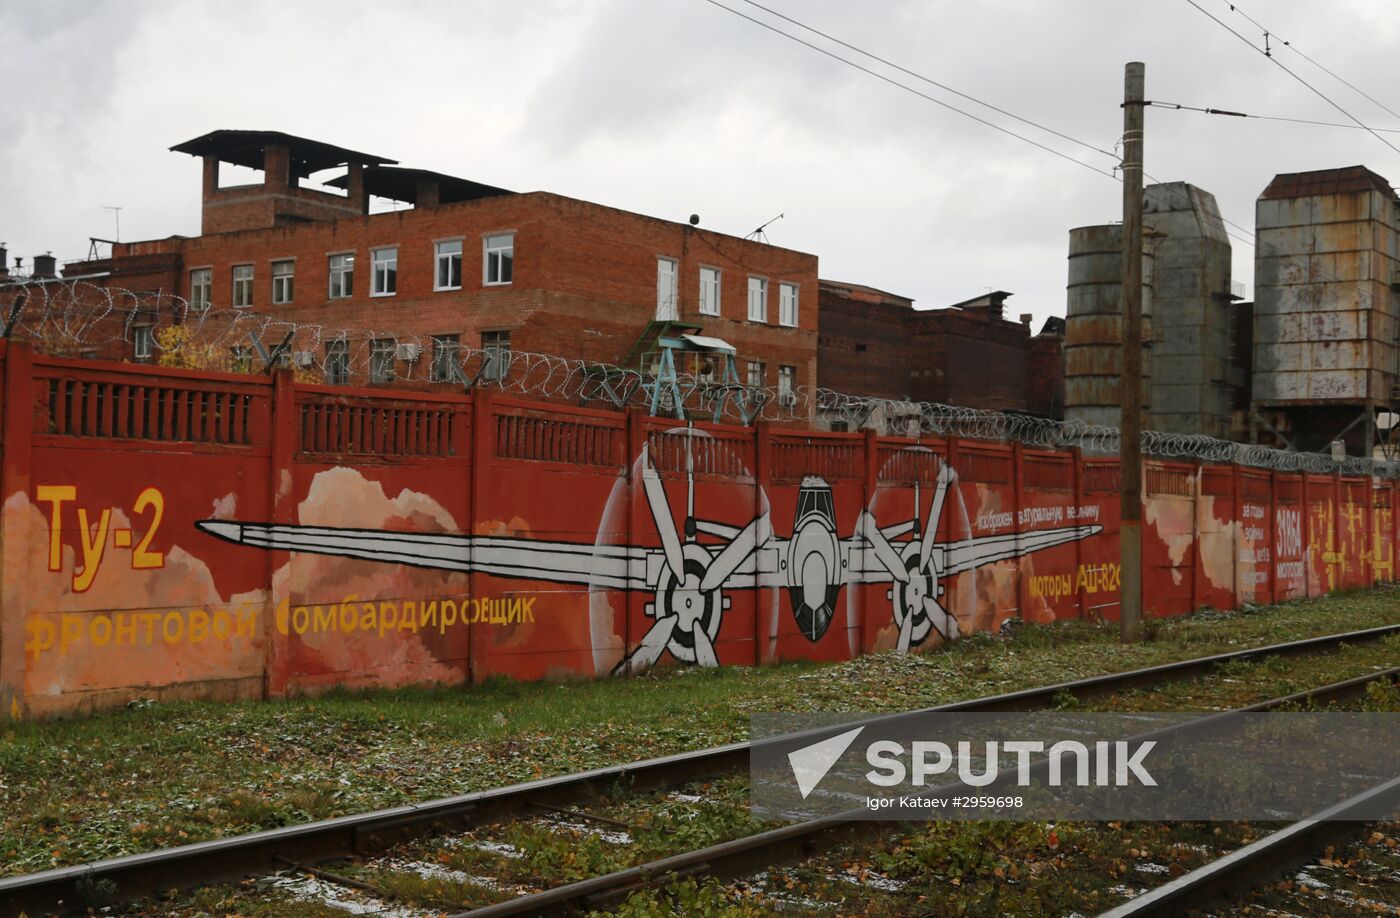 Graffiti in Perm featuring history of Russian aviation